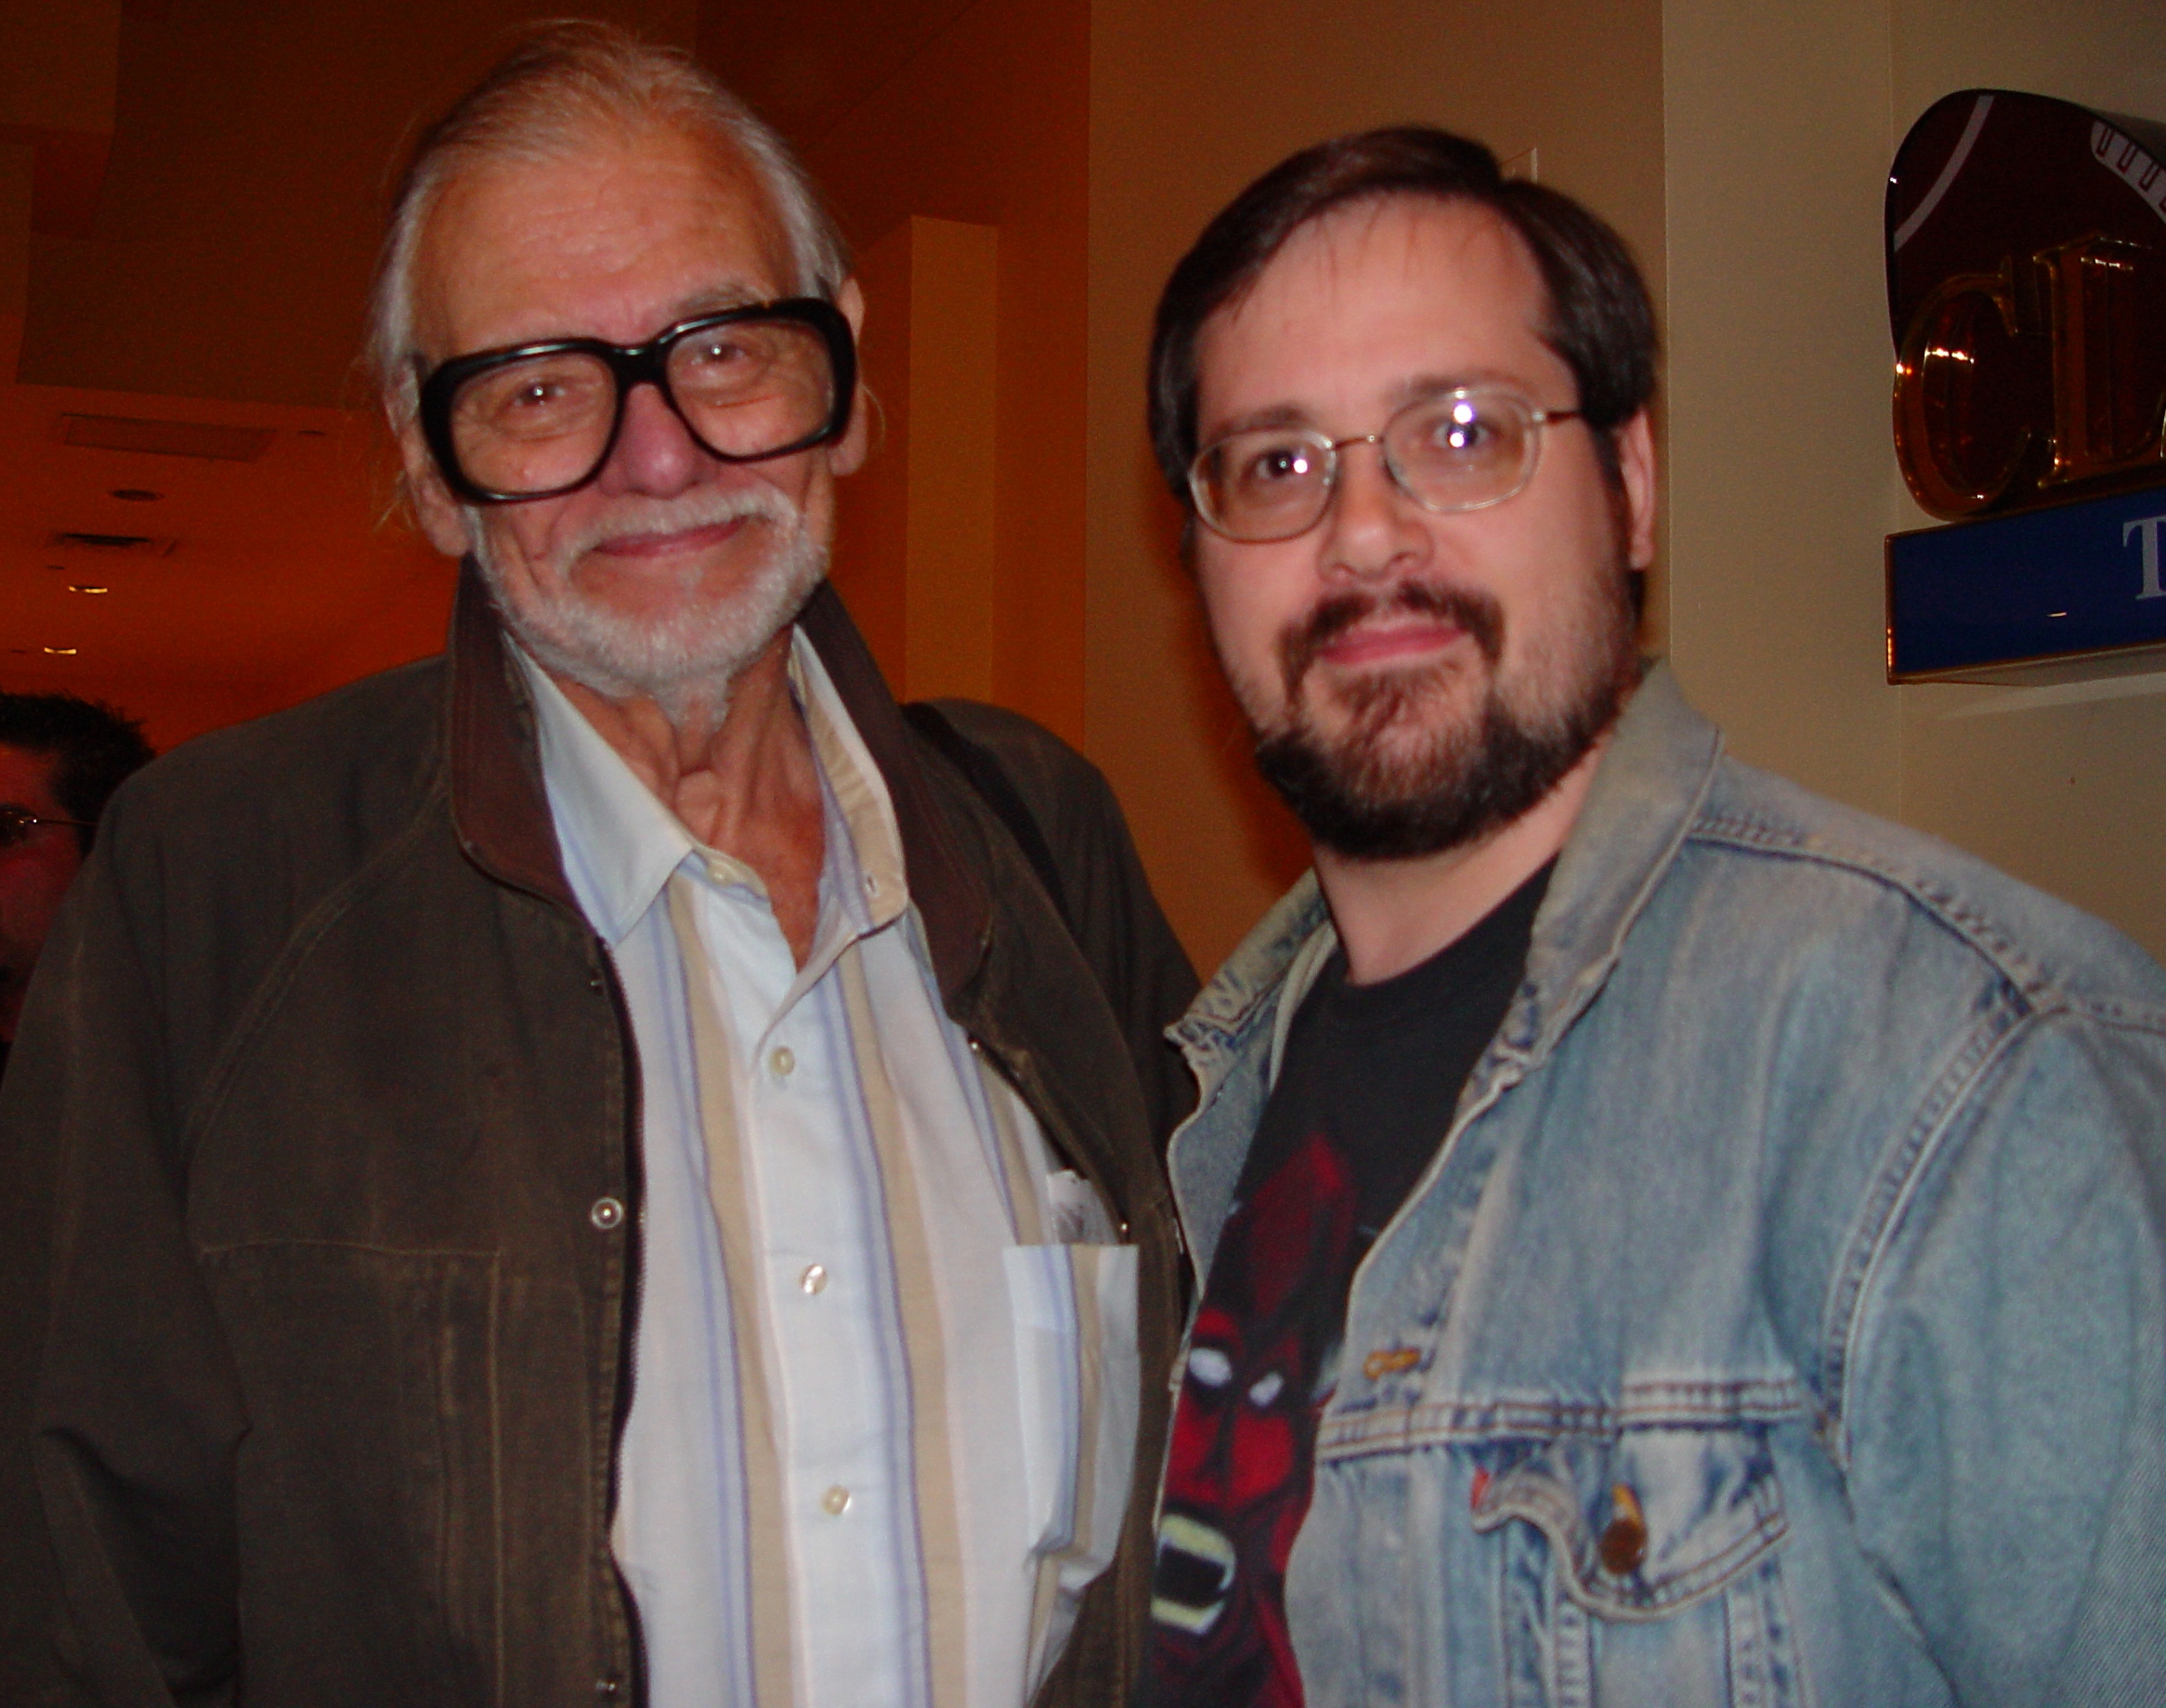 George Romero and Glen Baisley at the Chiller Theatre show.